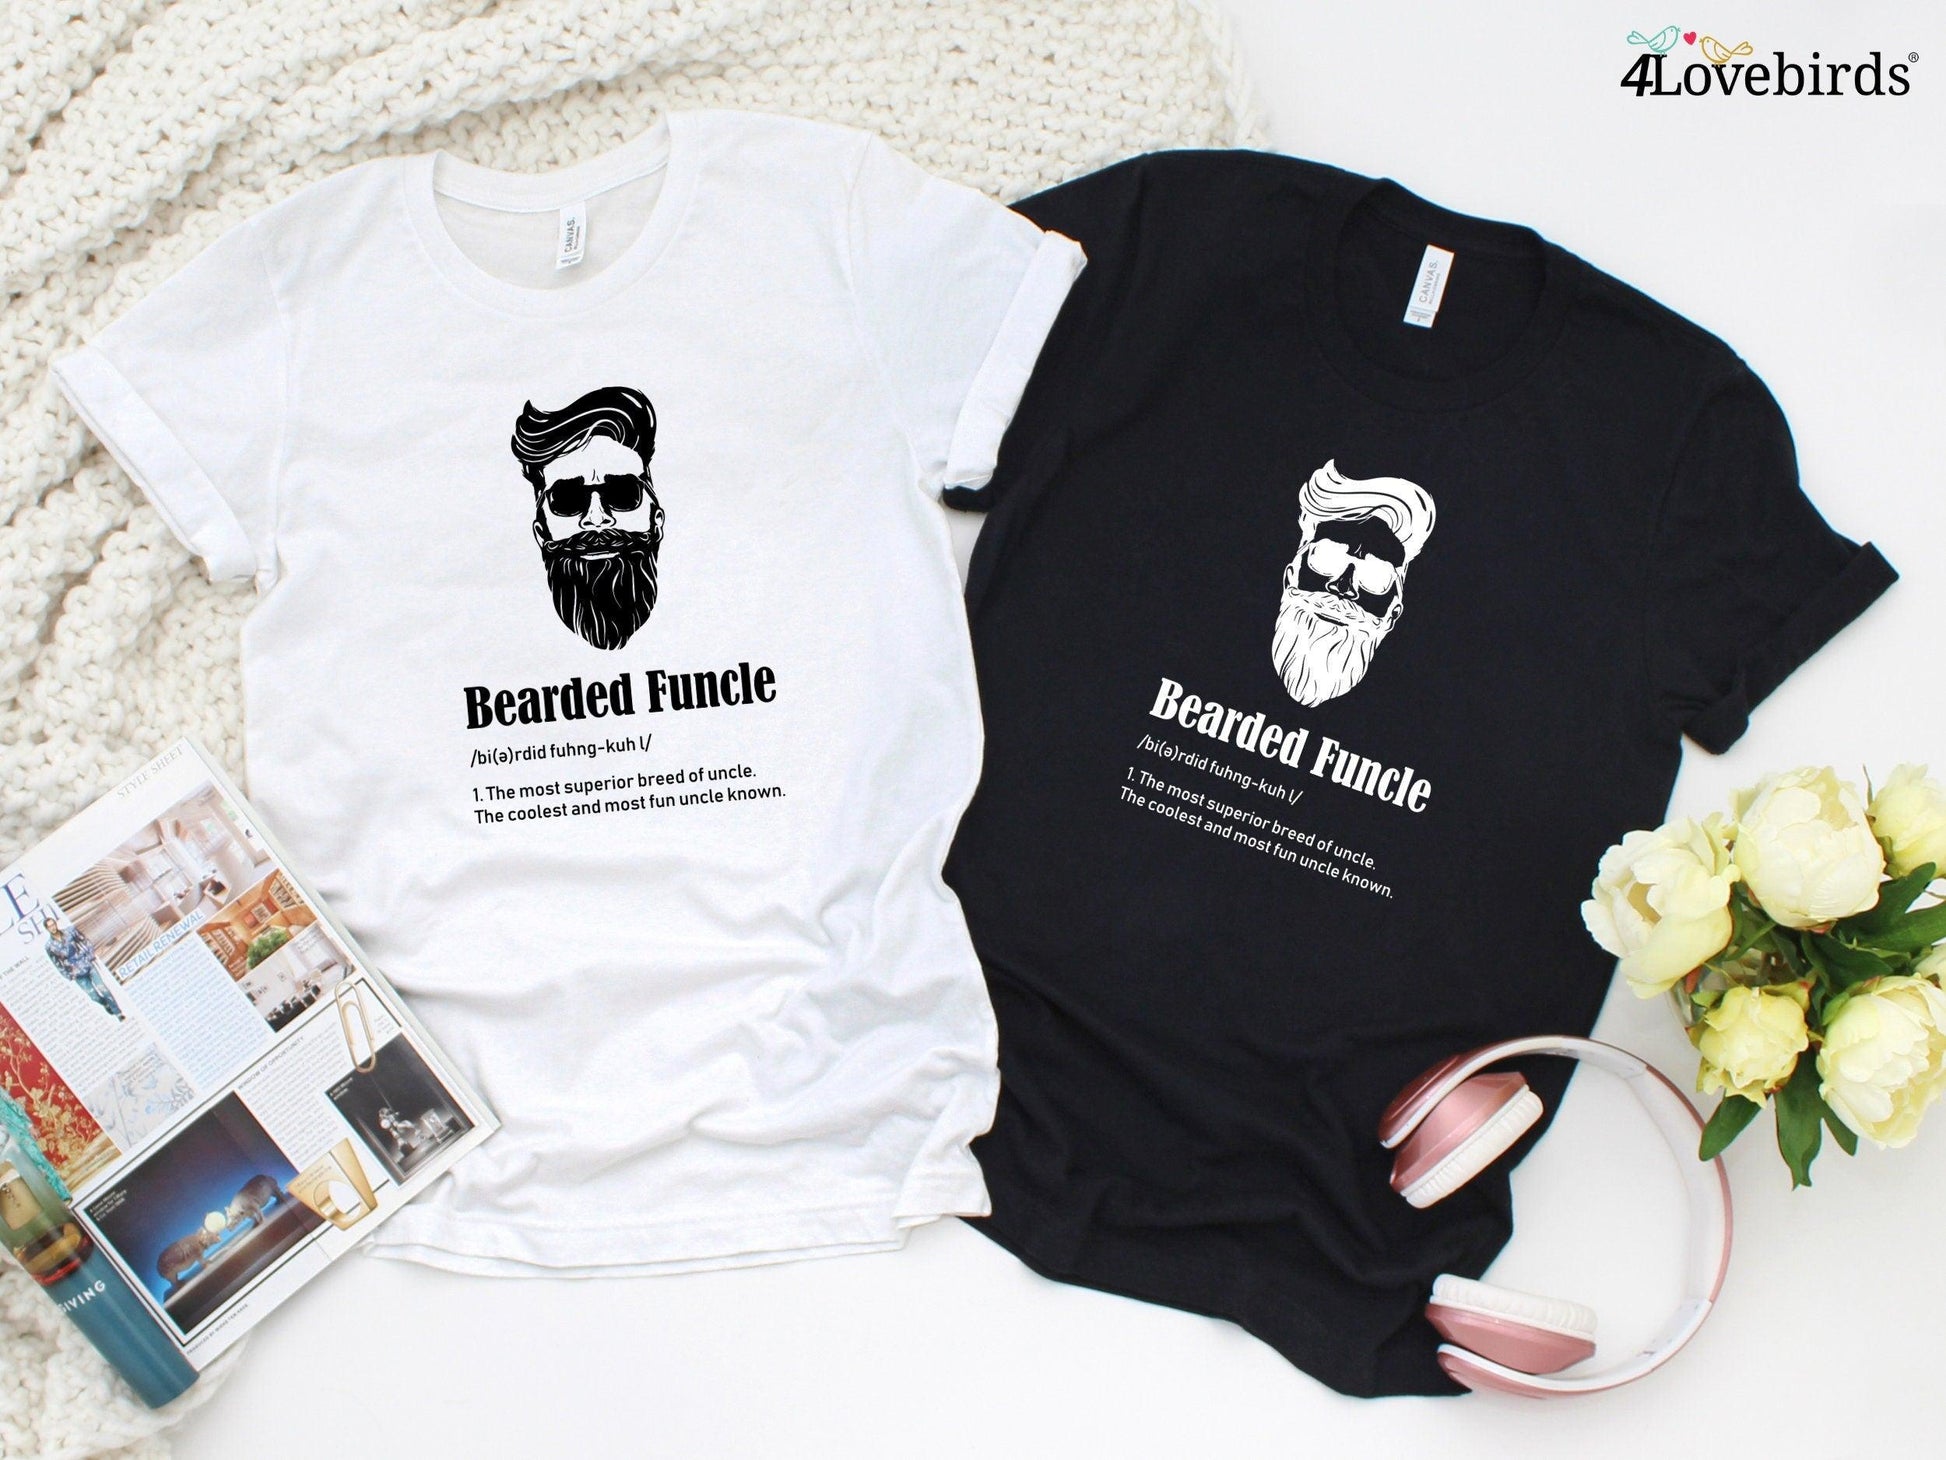 Bearded Funcle Hoodie, Funny Uncle Shirt, Bearded Funcle Definition Shirt, Funny Family Gift,Uncle T Shirt,Bearded Uncle Shirt, Uncle Gift - 4Lovebirds